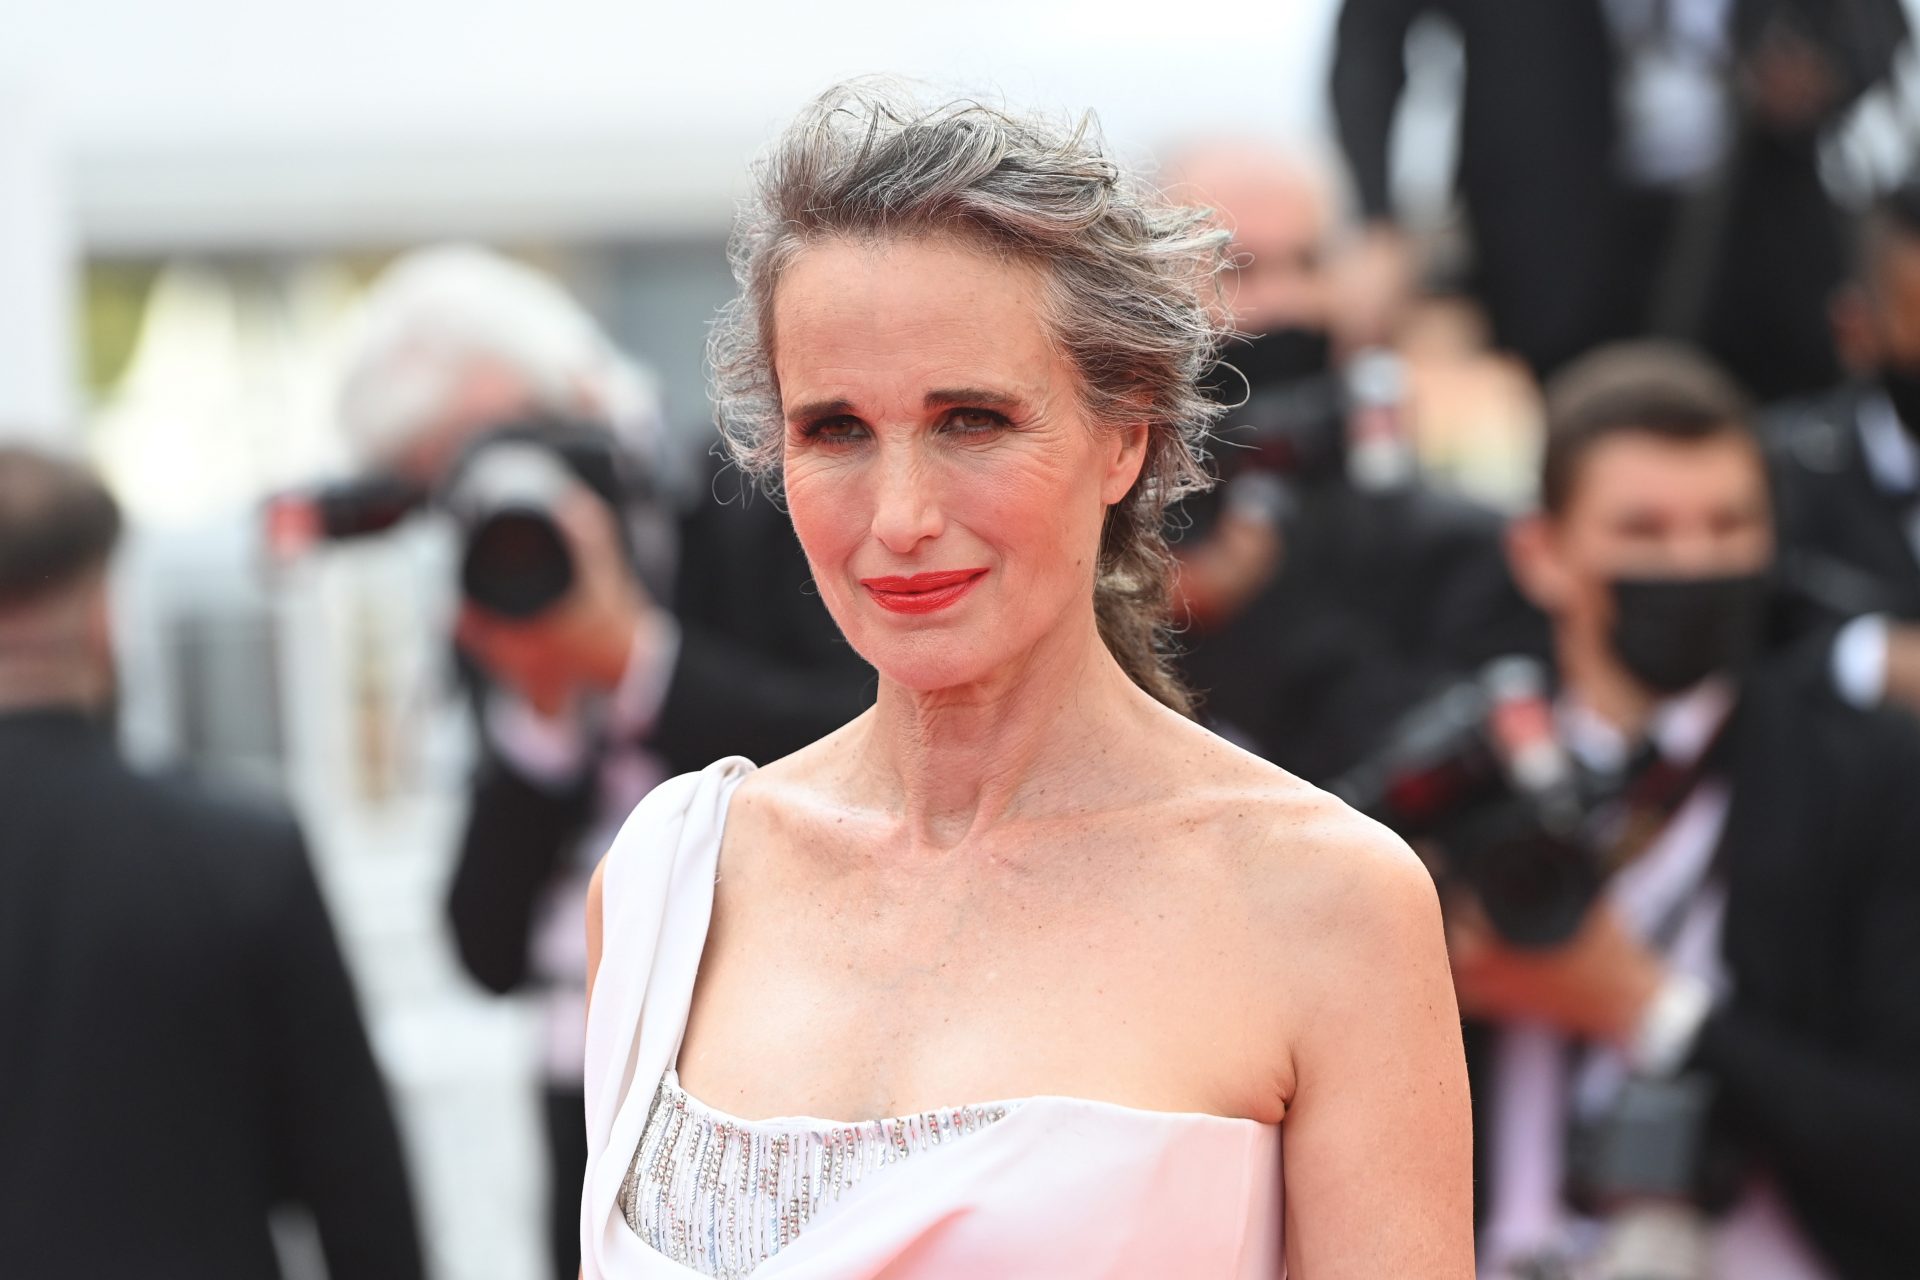 Andie MacDowell on Childhood Trauma and PTSD: ‘It’s in Your Bones’